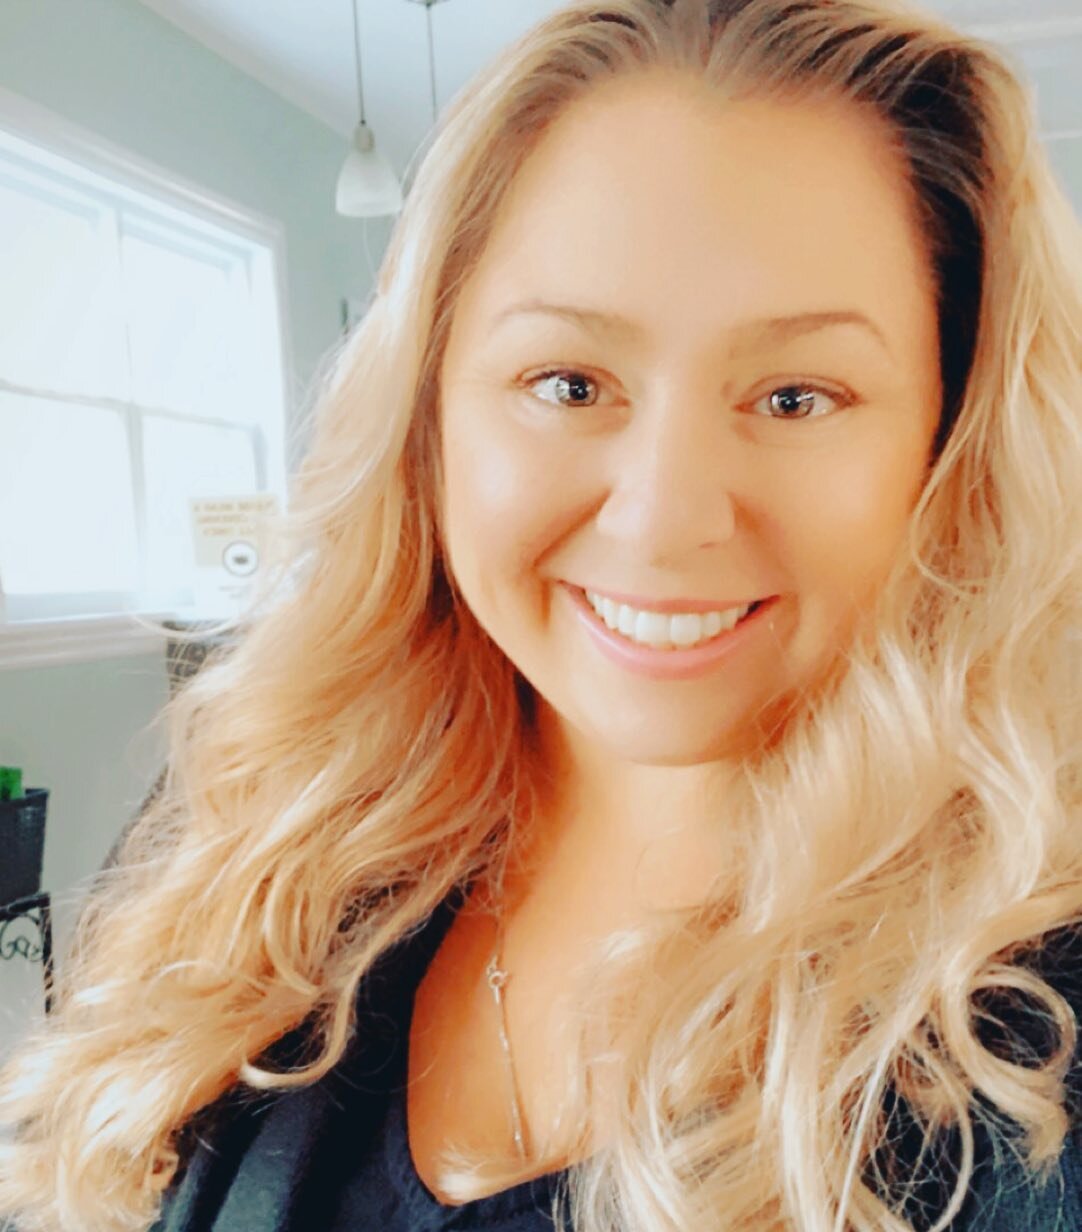 Ashley has been nominated and is running for the the Board of NS Cosmetology Association again this year. We wish her good luck and we look forward to this years AGM ! #AGM2020 #cosmetologyassociationofns #goodluck #cosmetologylife